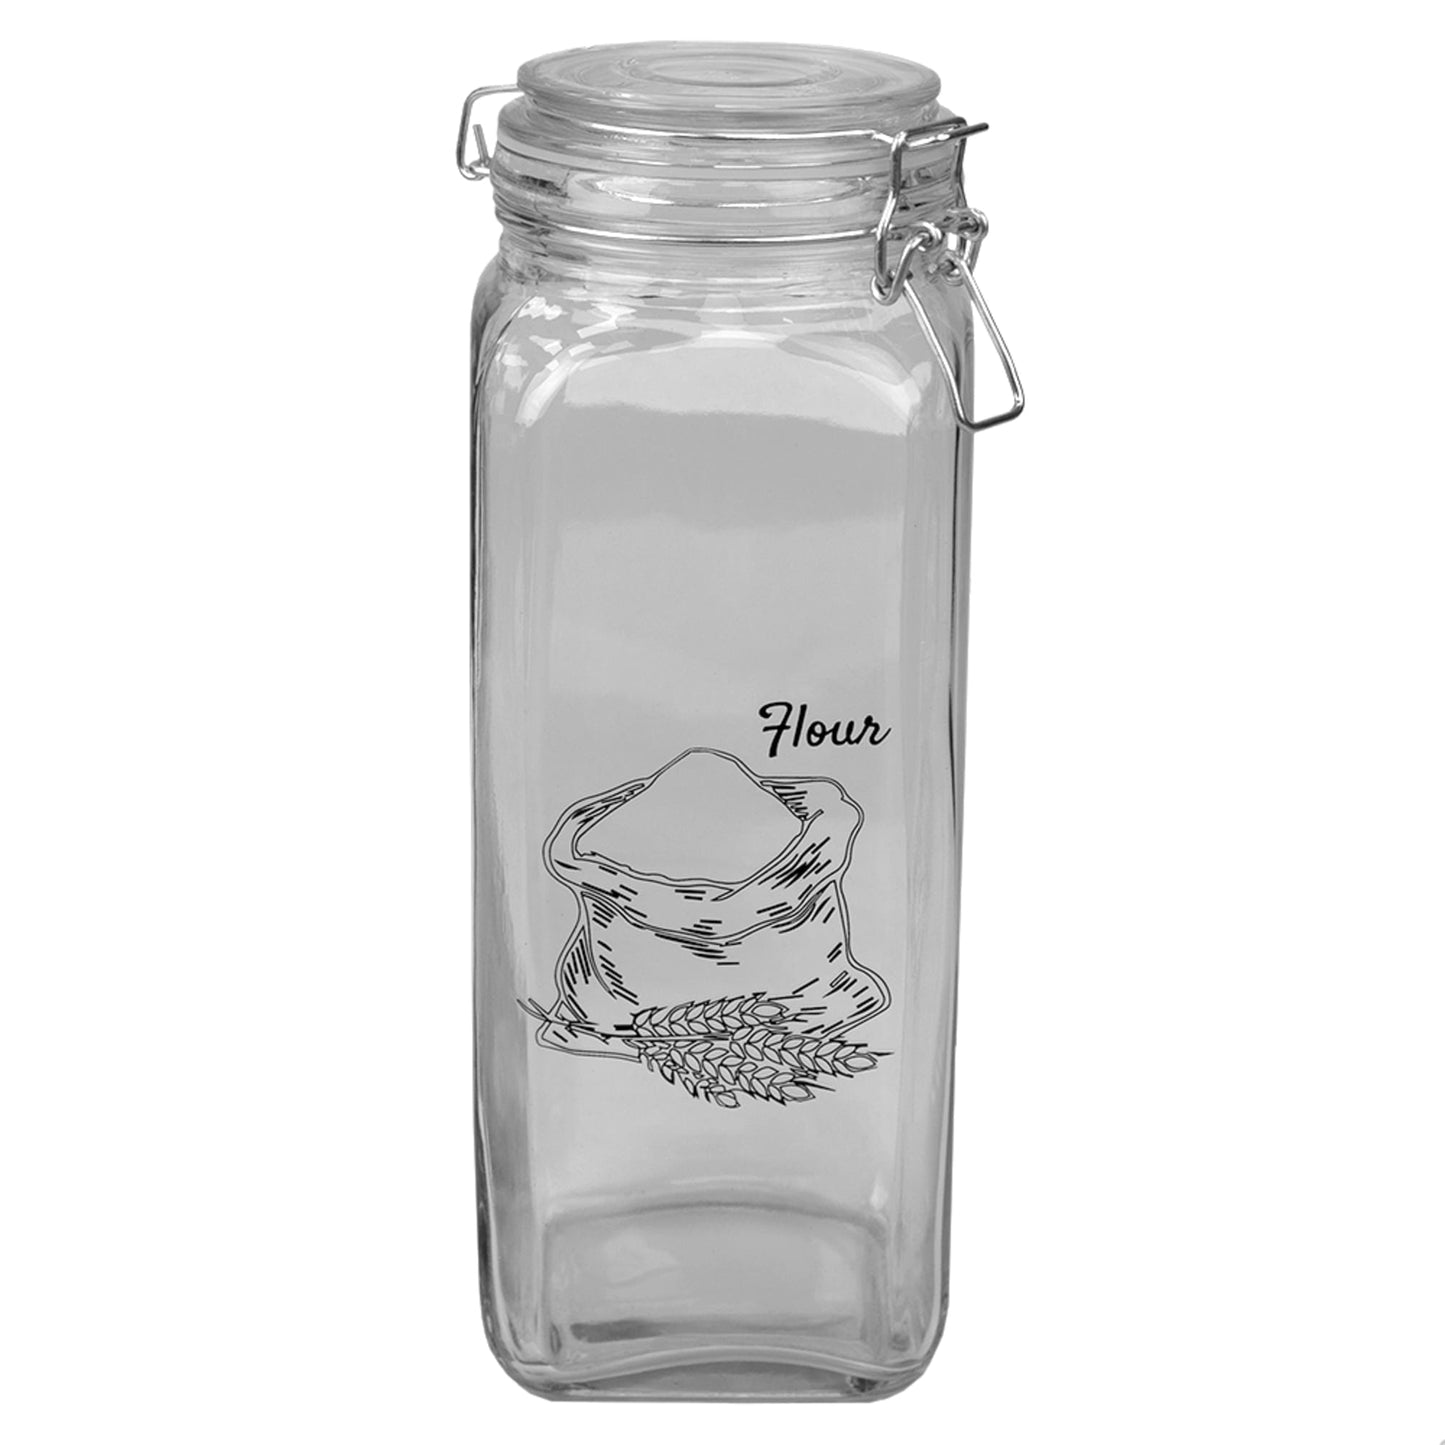 Ludlow 67 oz. Glass Canister with Metal Clasp, Clear